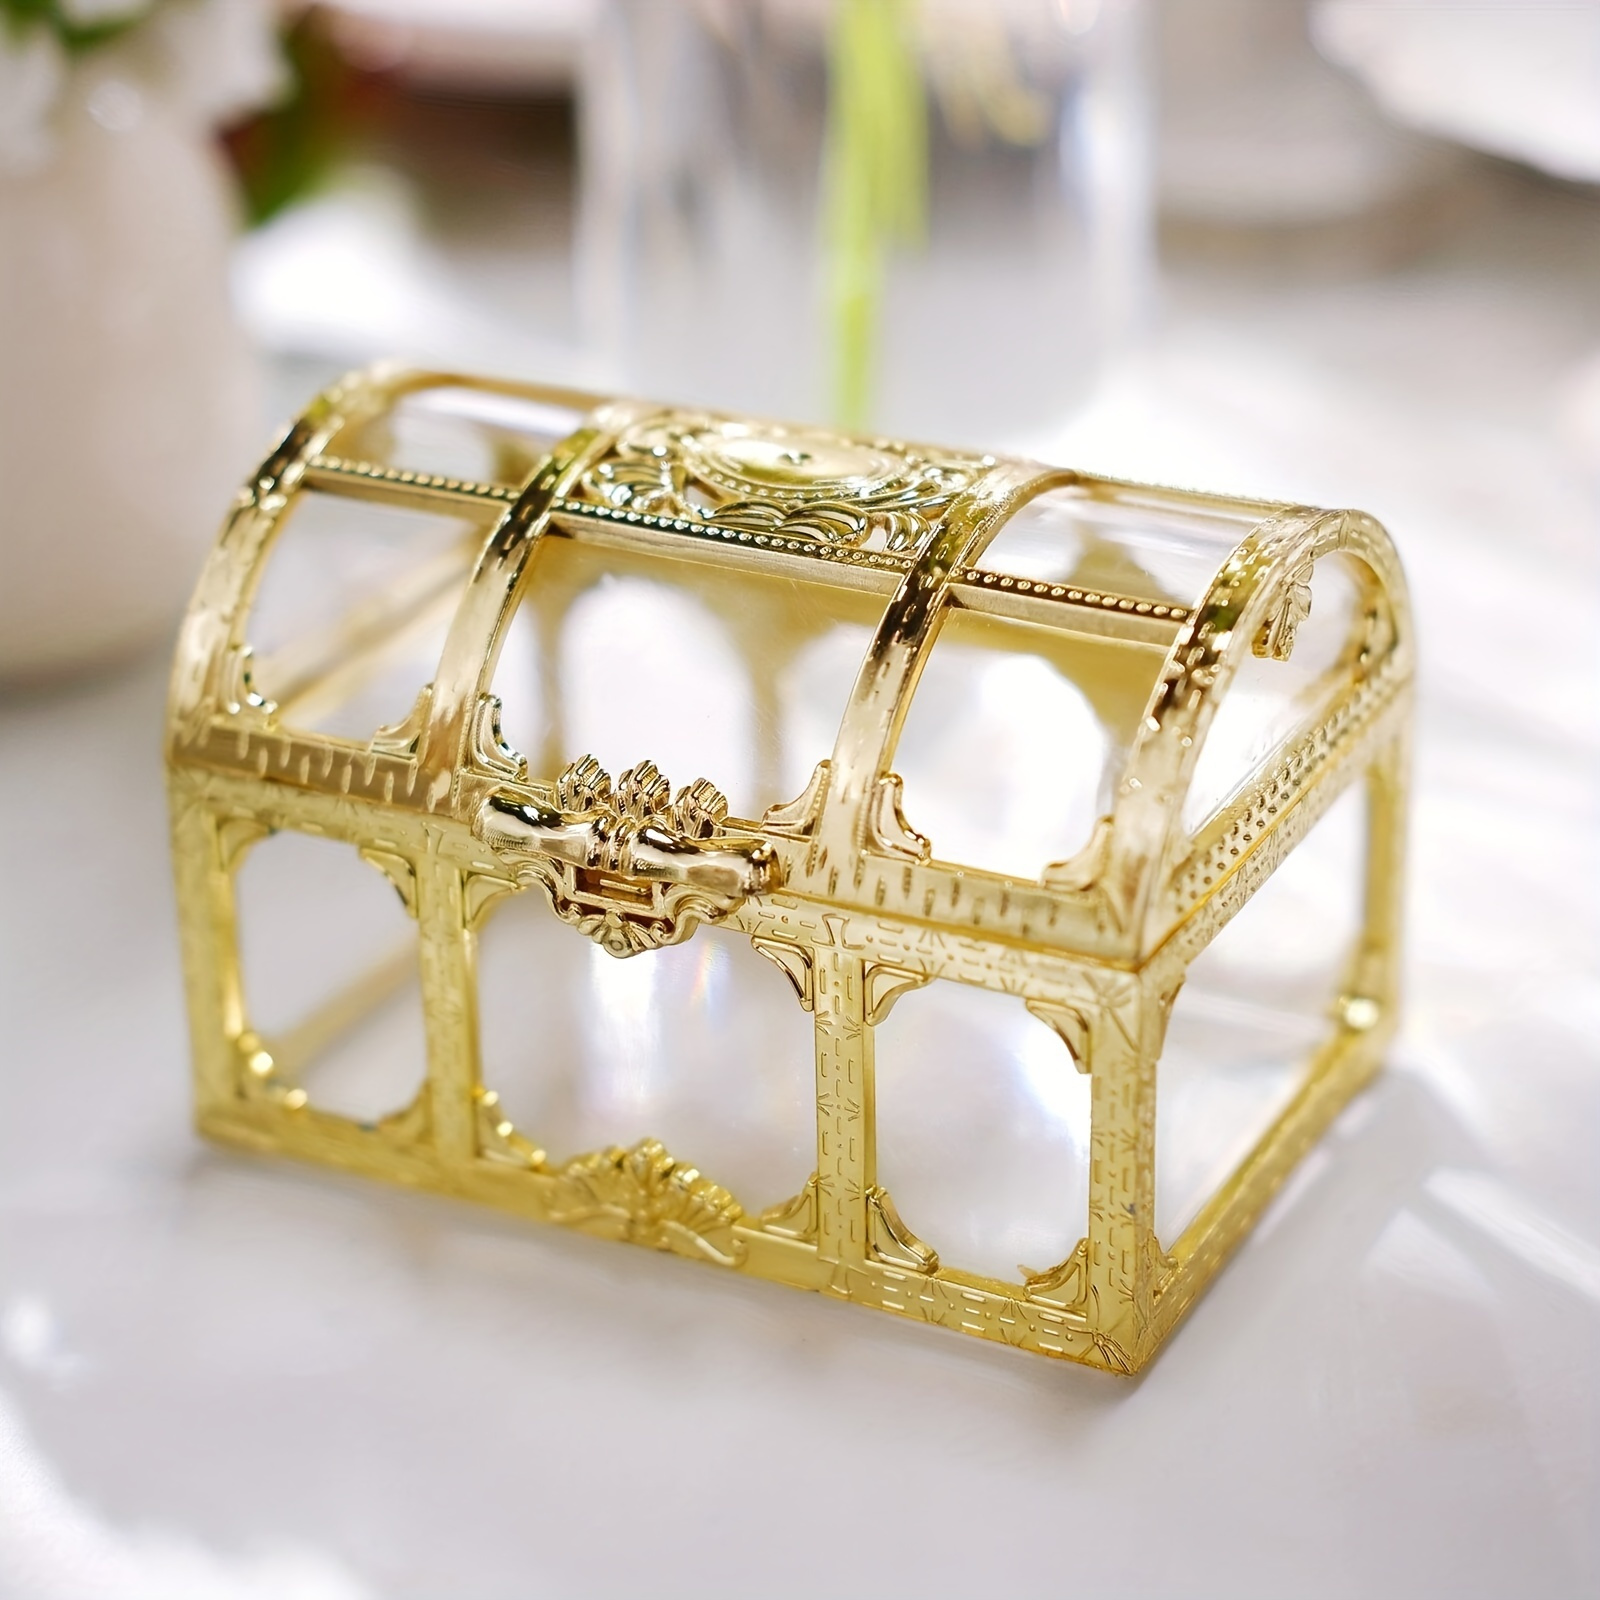 1pc Vintage Golden Treasure Chest Jewelry Box - Perfect for Weddings,  Gifts, and Candy Packaging